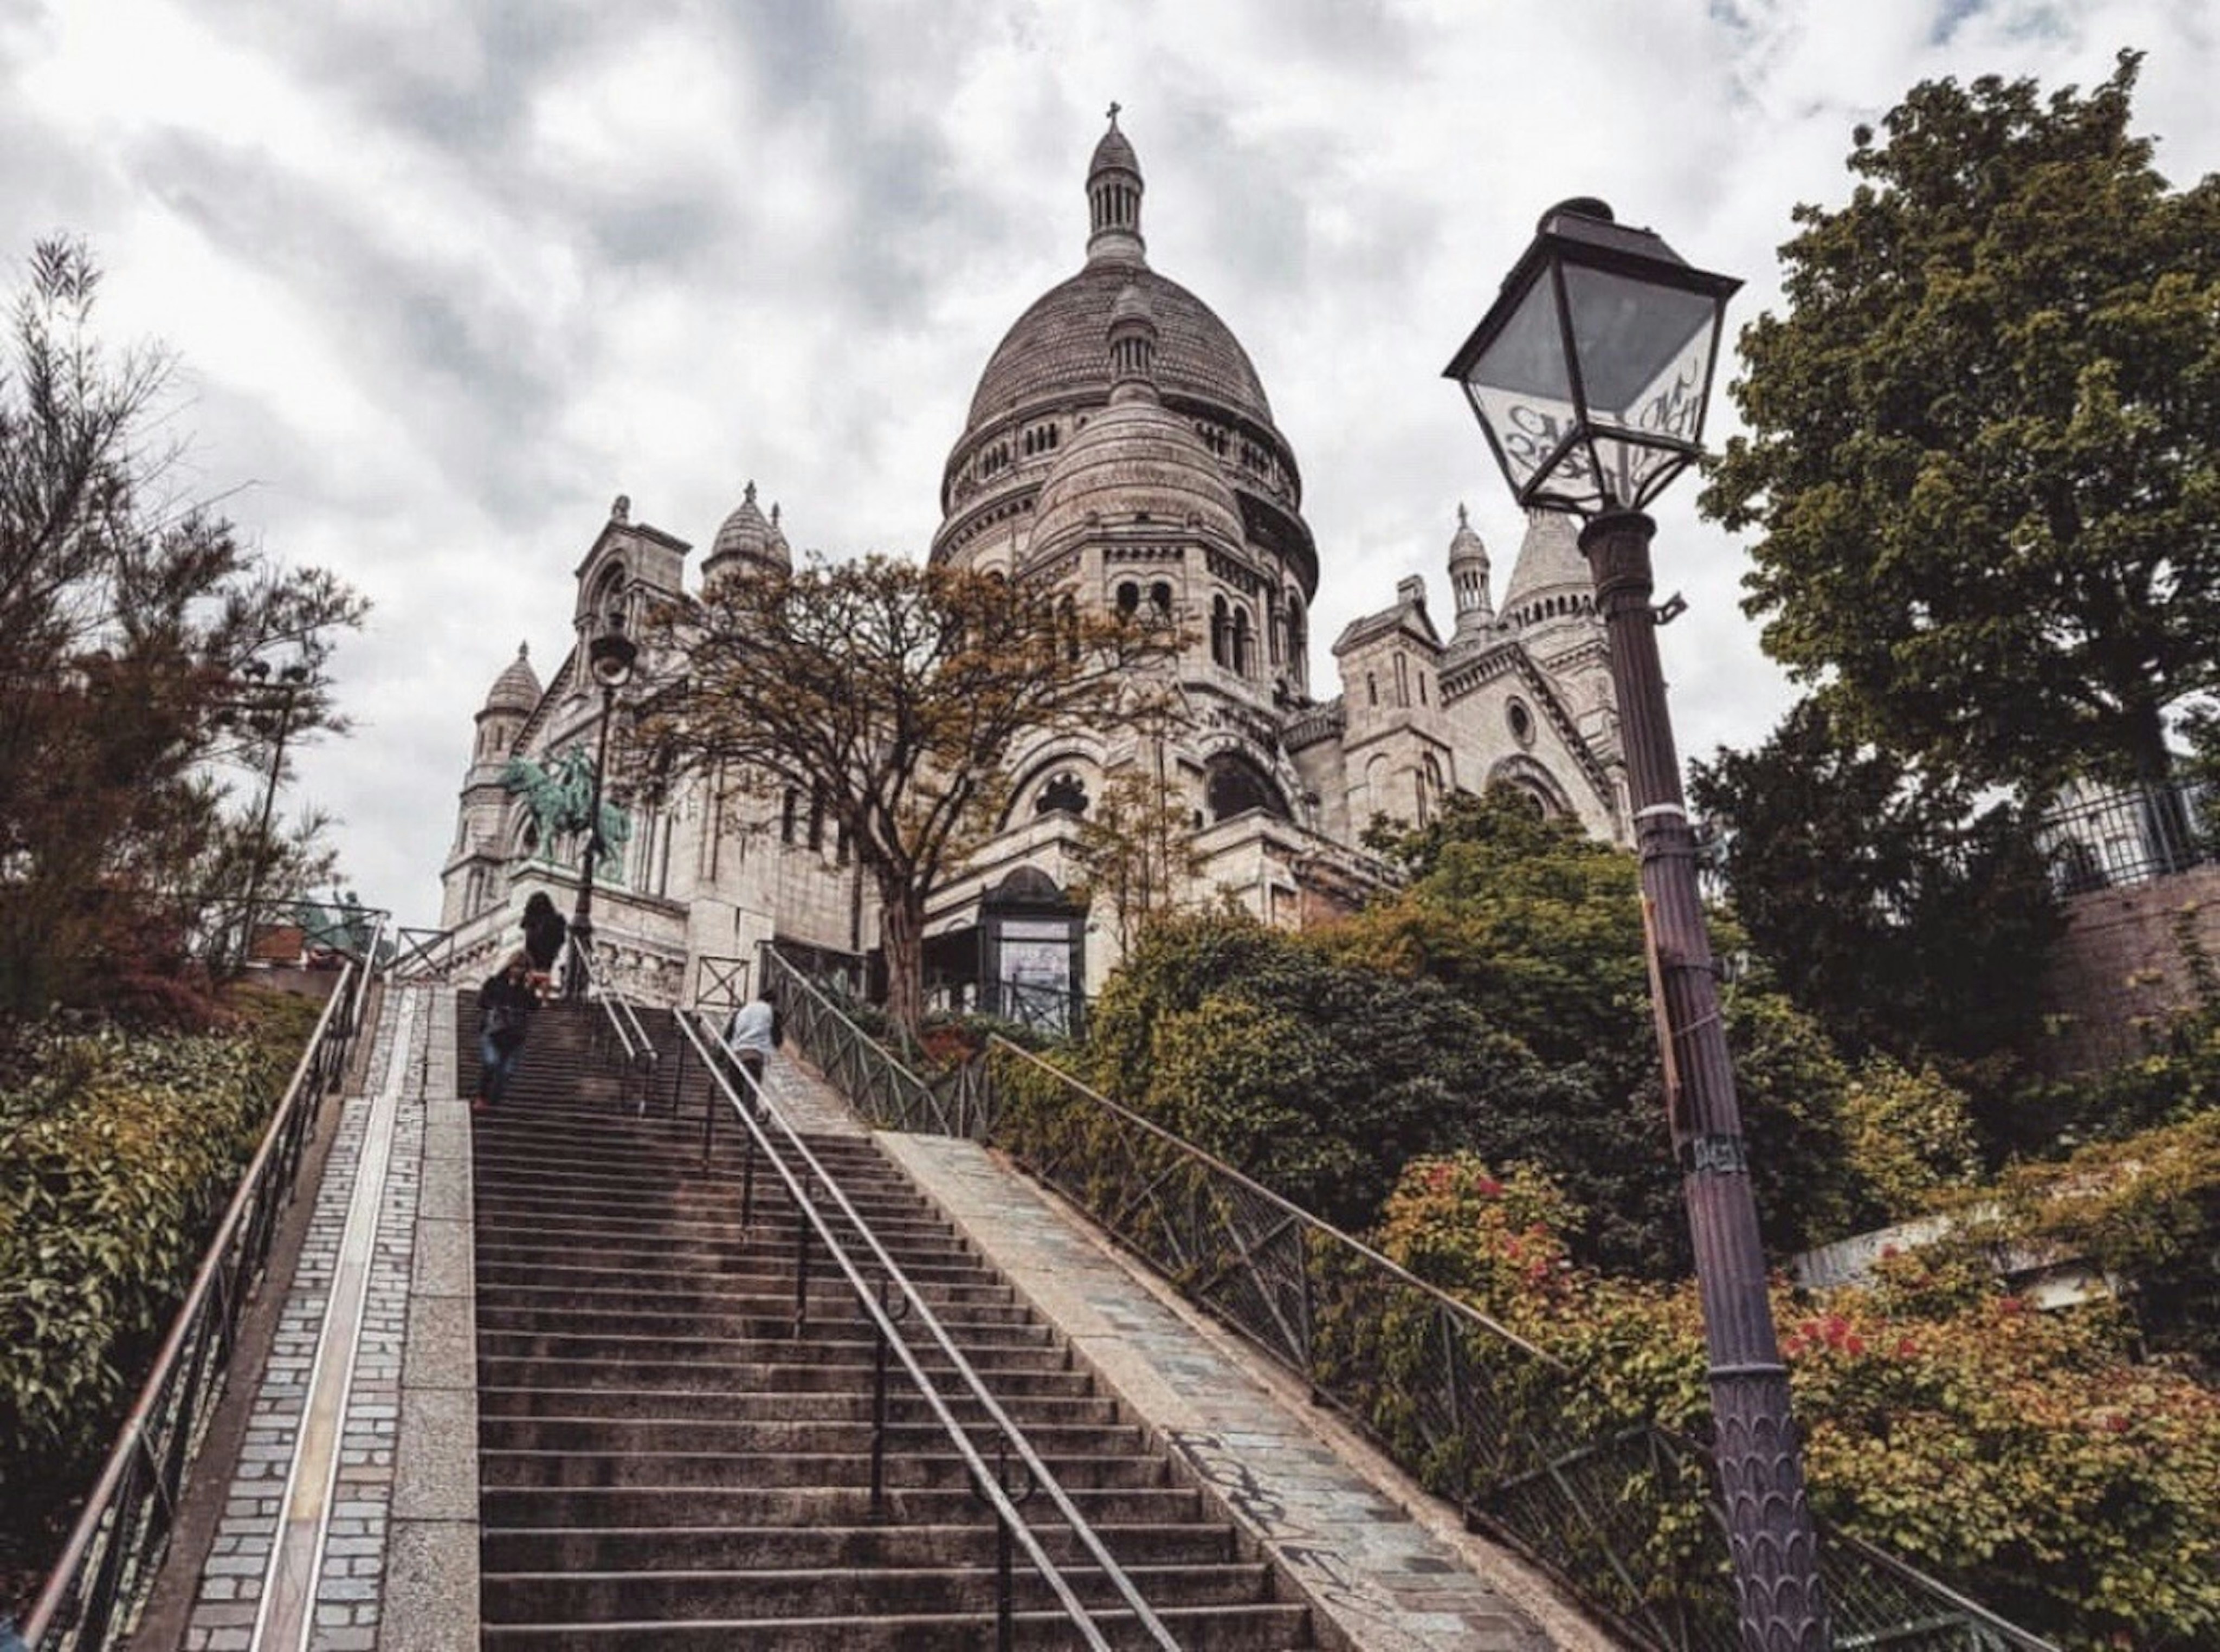 Choose from a curated selection of Paris photos. Always free on Unsplash.